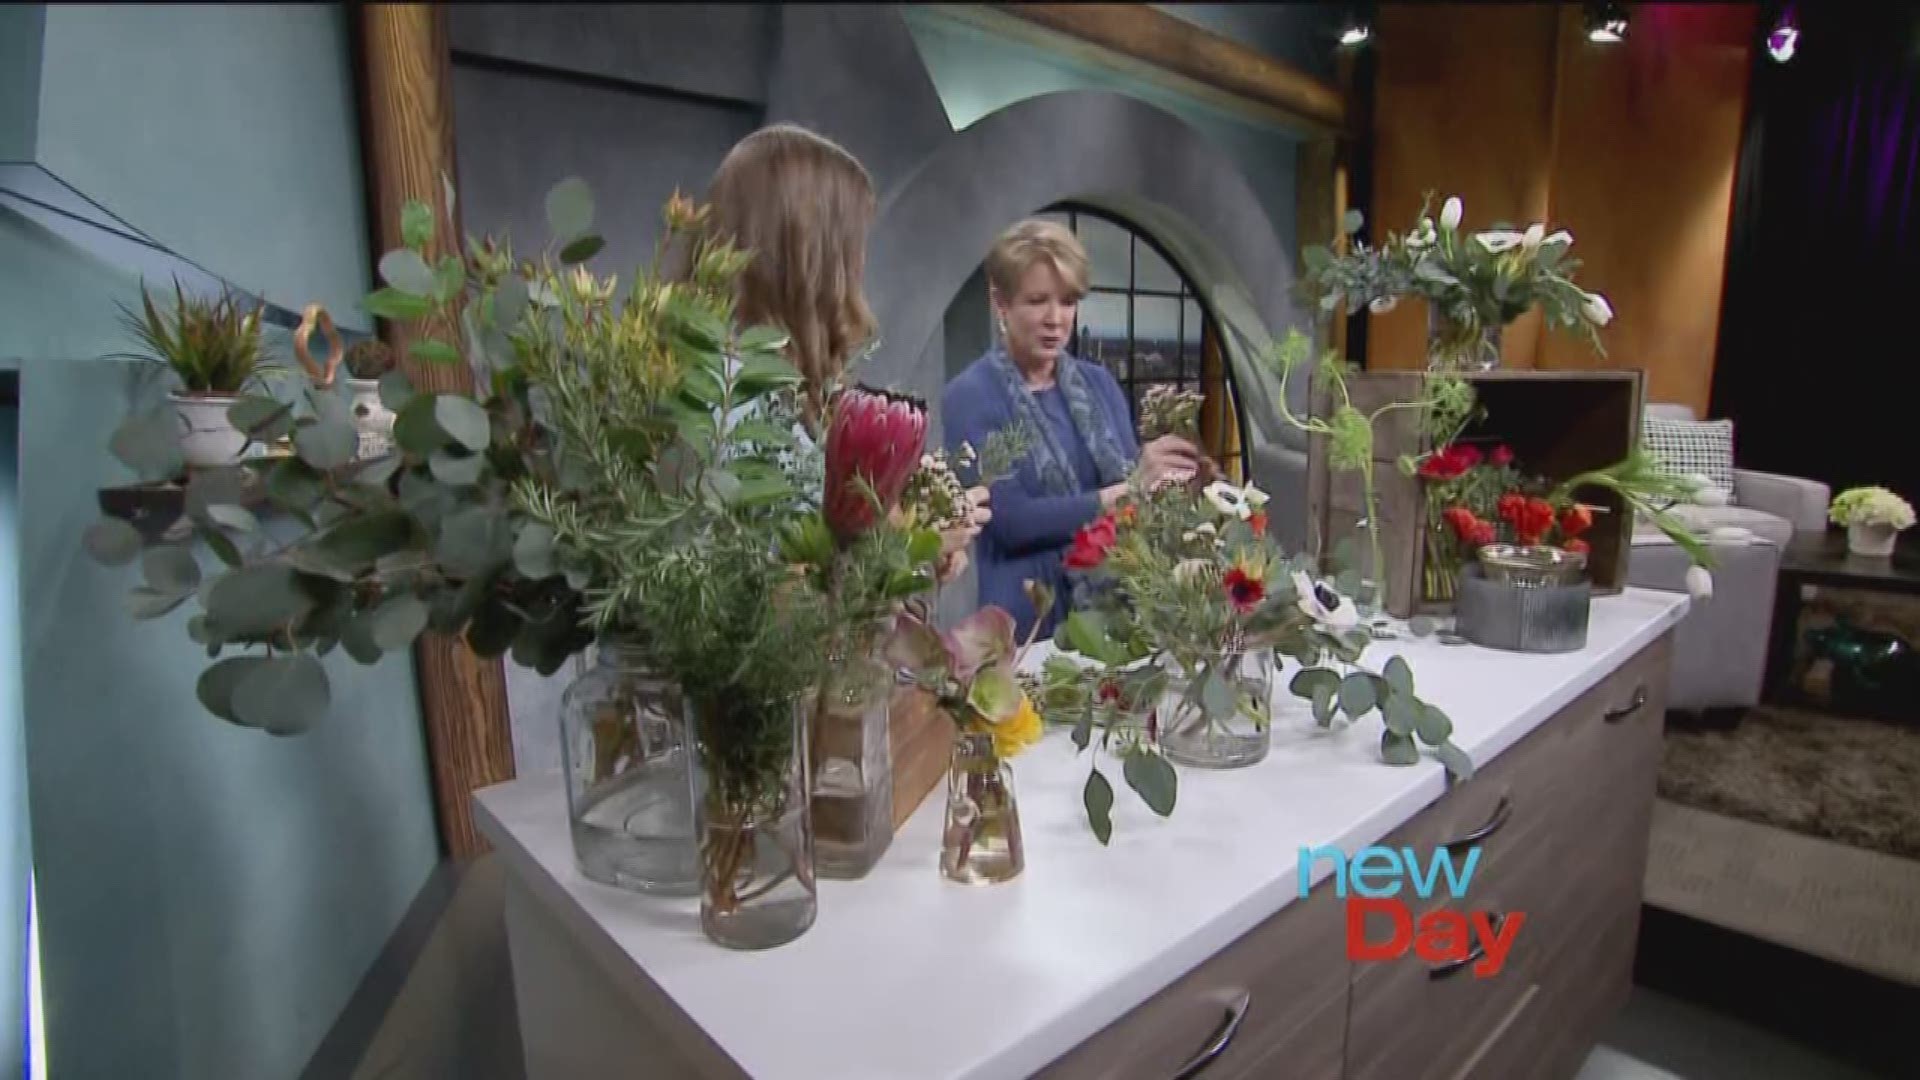 Sarah Abare joins us from the flower delivery service, The Stemmery, to talk about winter vs. summer bouquet variations and how to make an arrangement of your own!